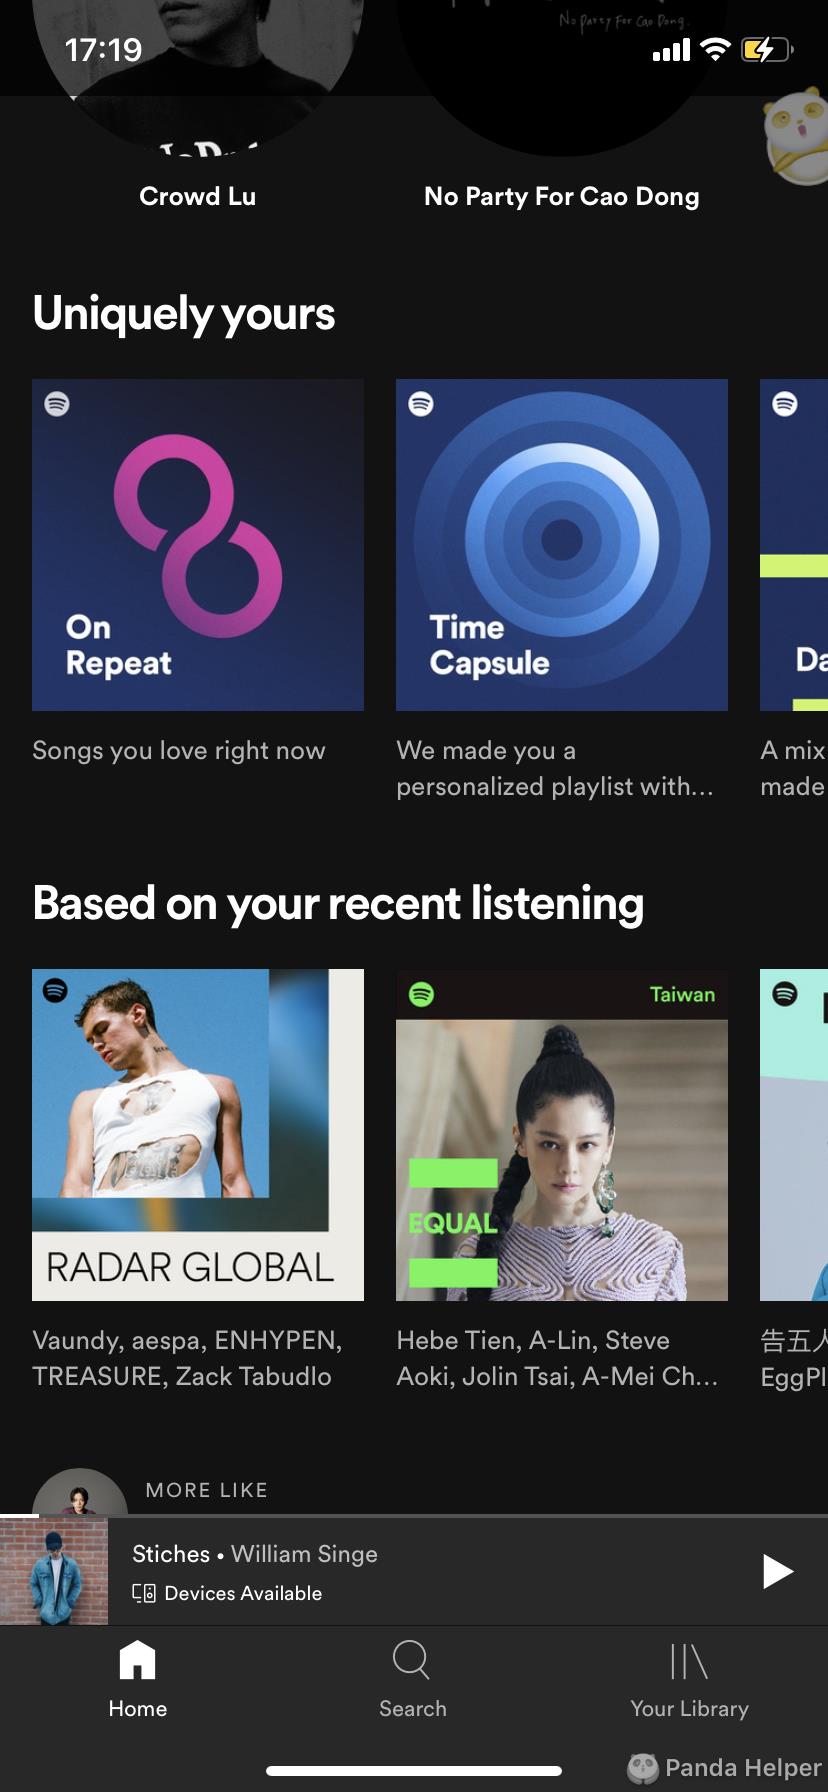 My experience with the Spotify++